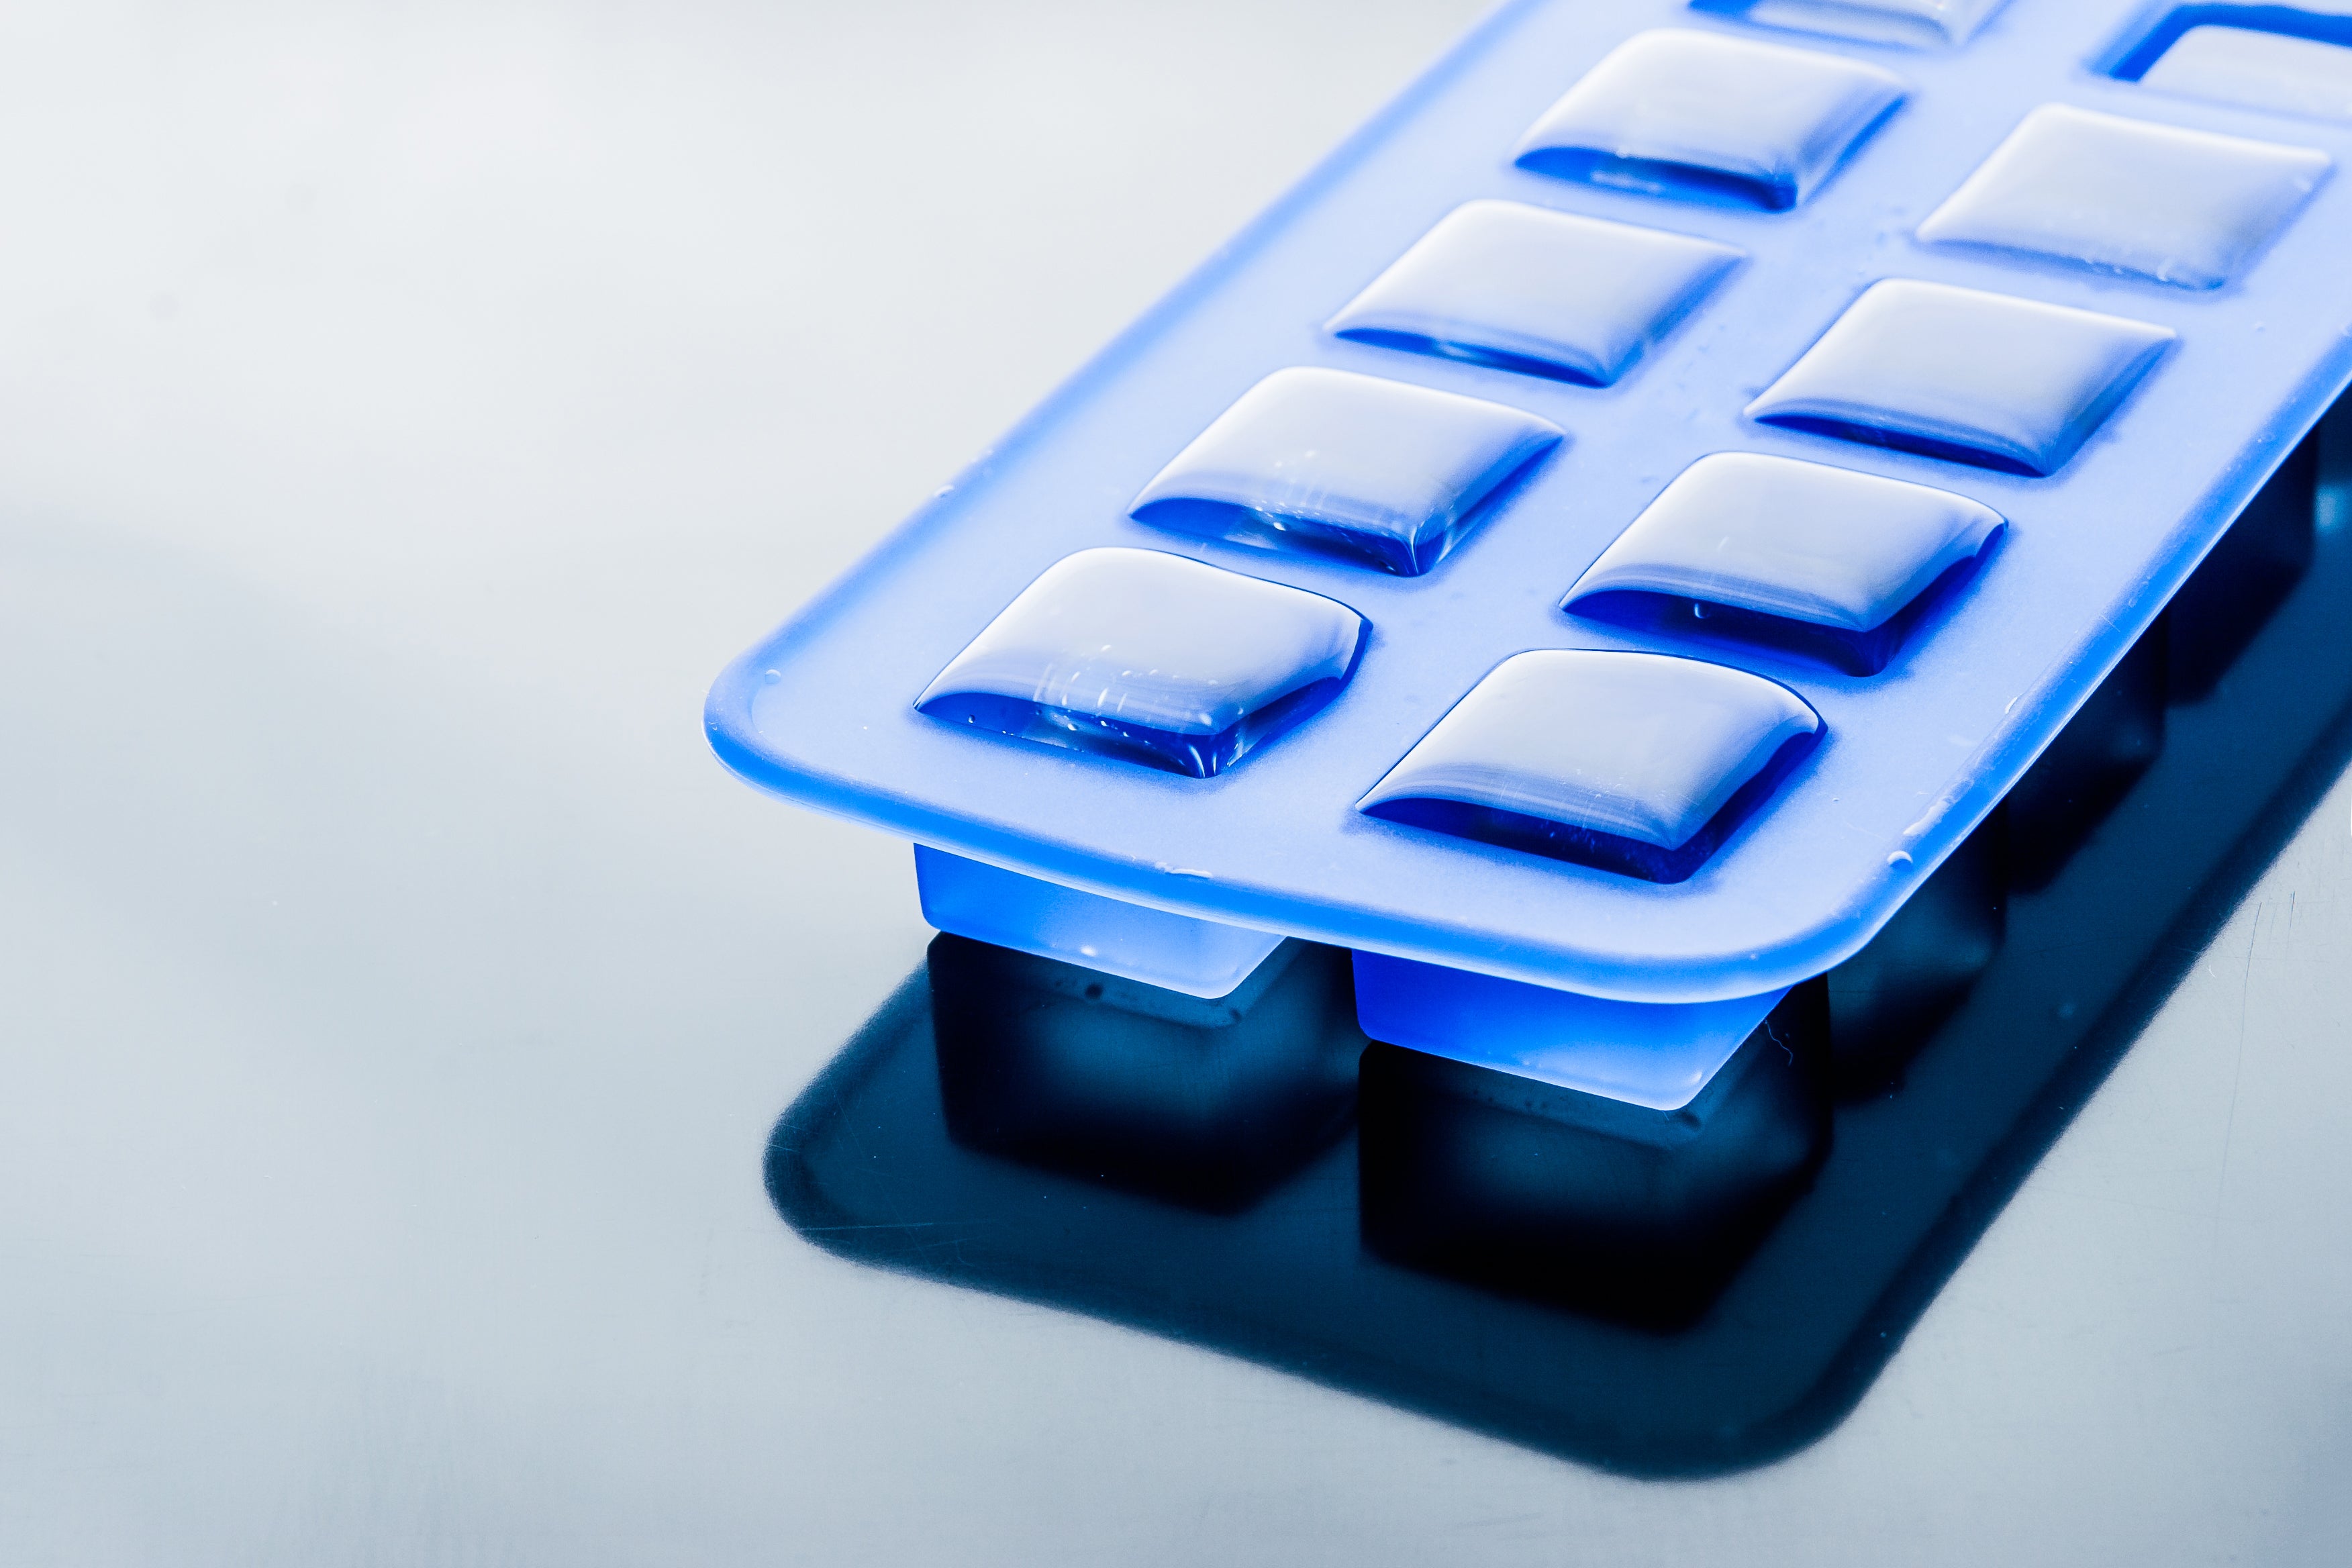 Are Silicone Ice Cube Trays Safe? Answers to All Your Ice Making Questions